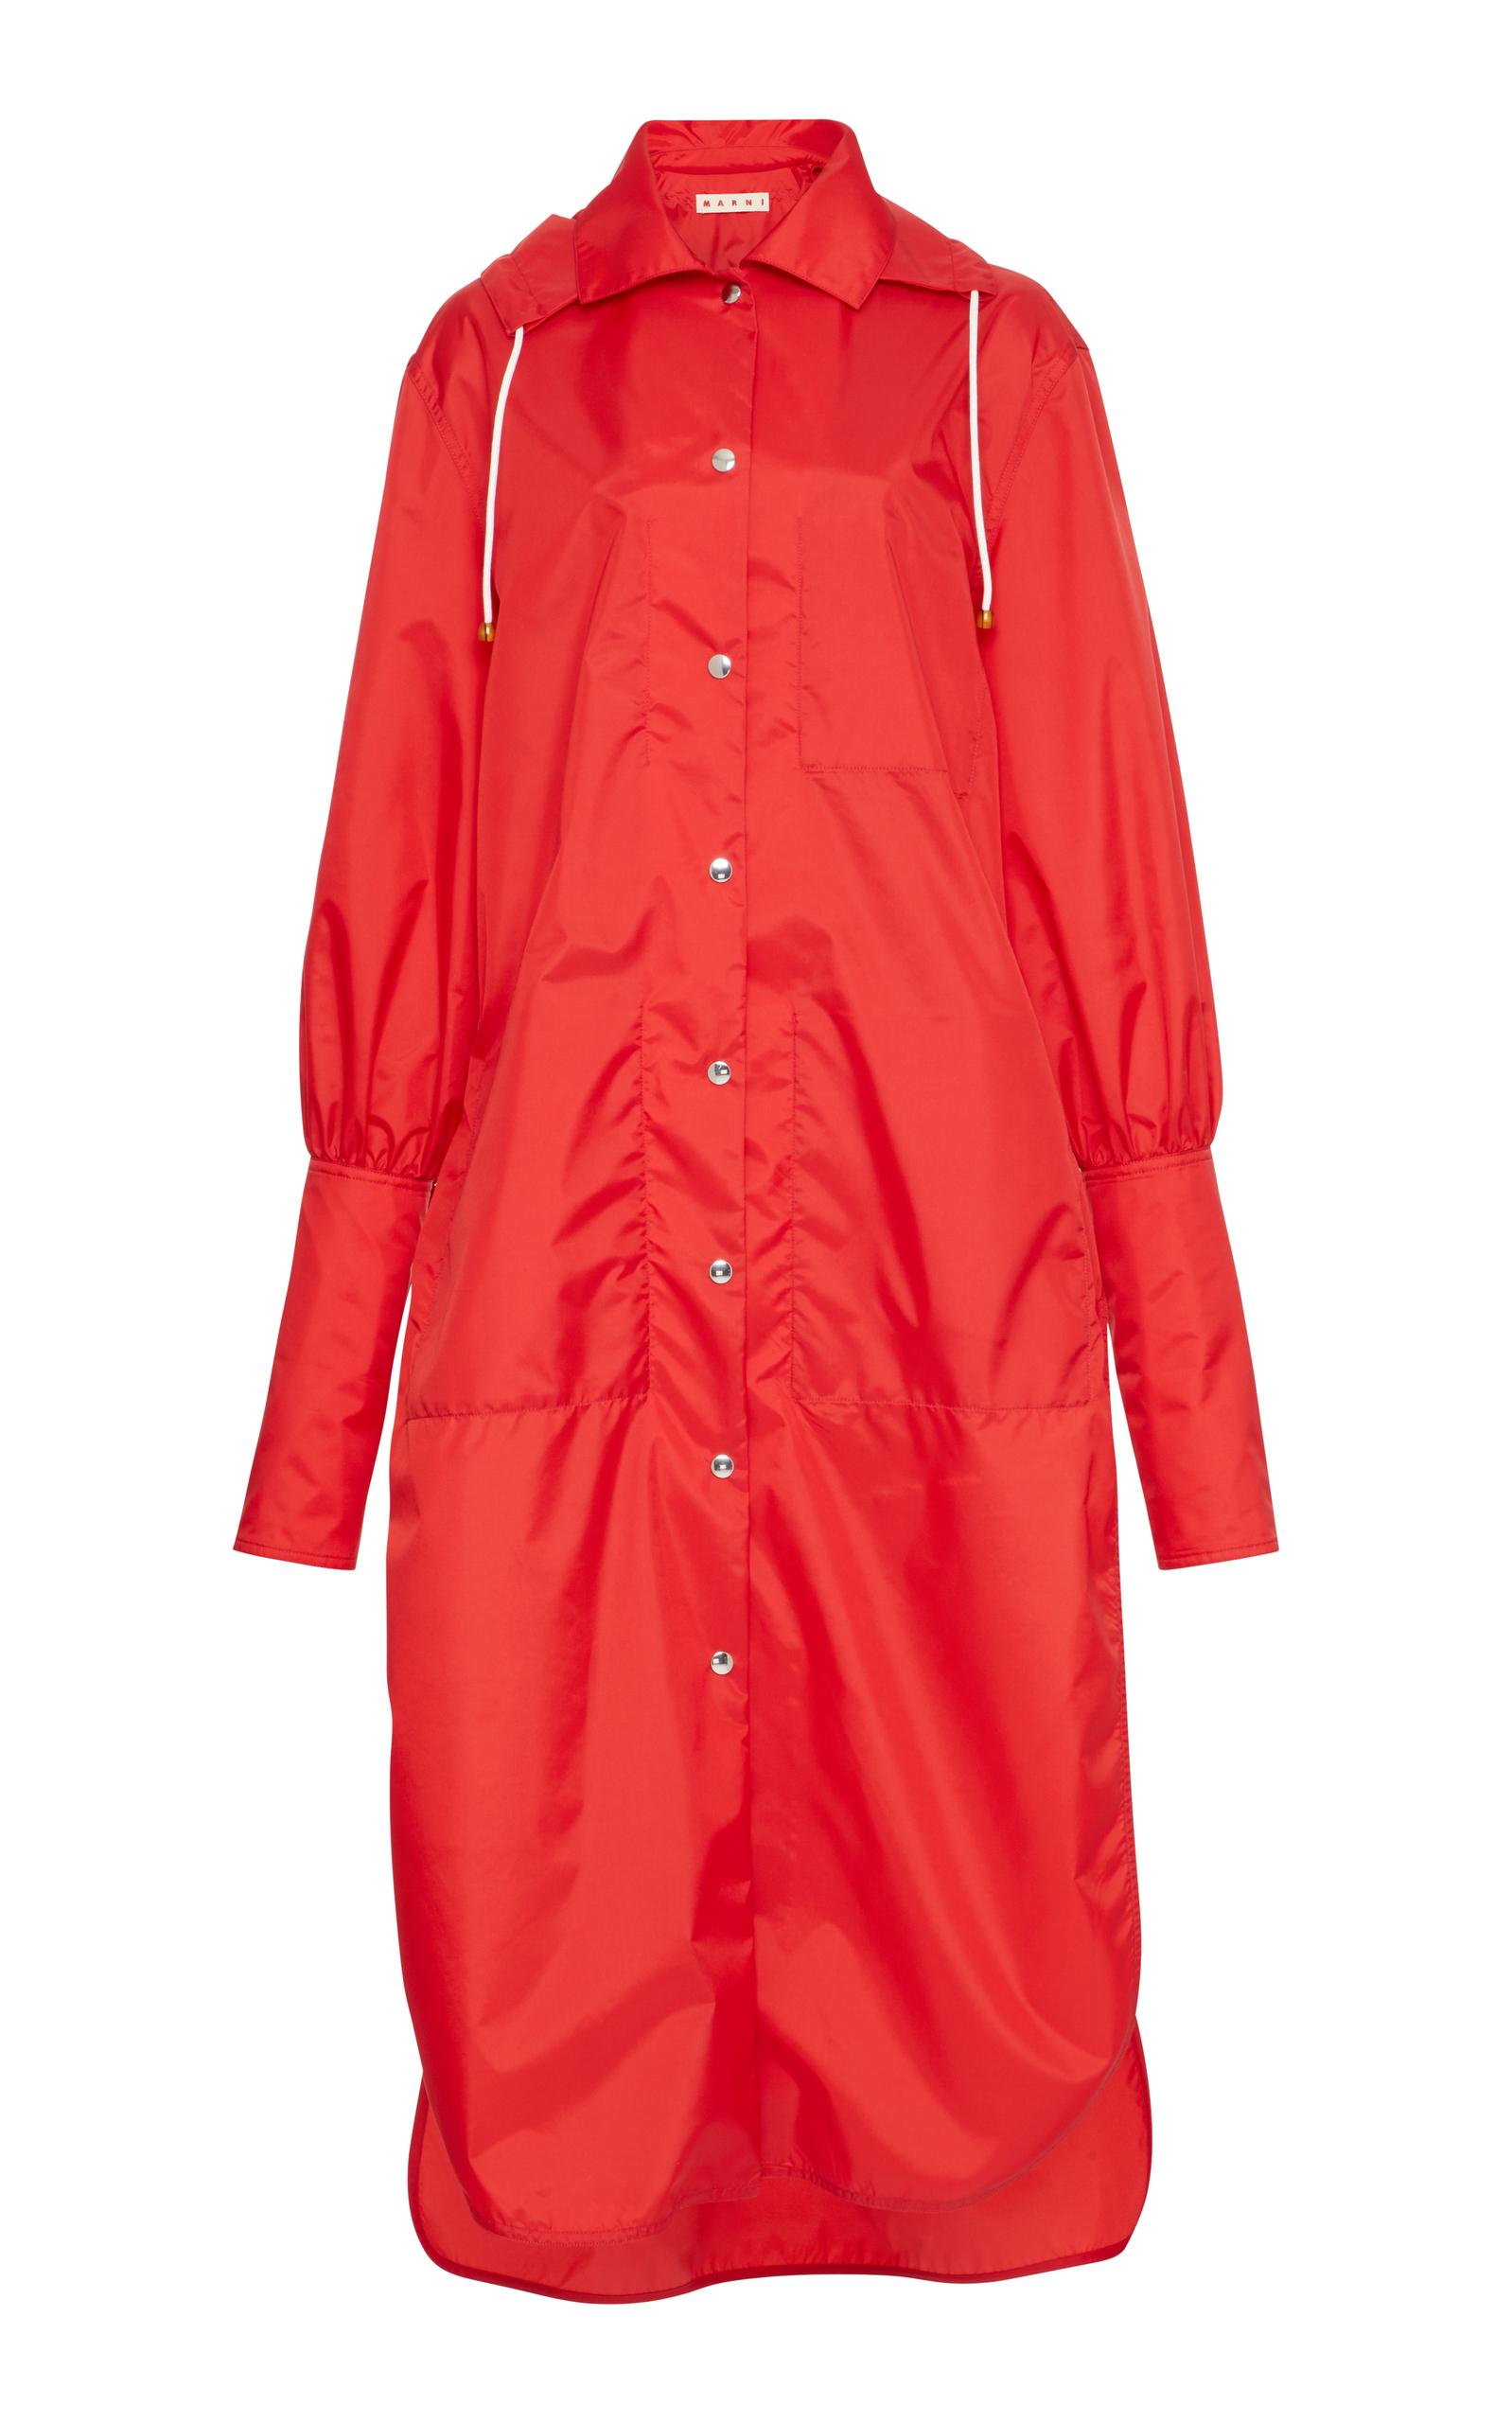 Marni Hooded Jacket in Red | Lyst